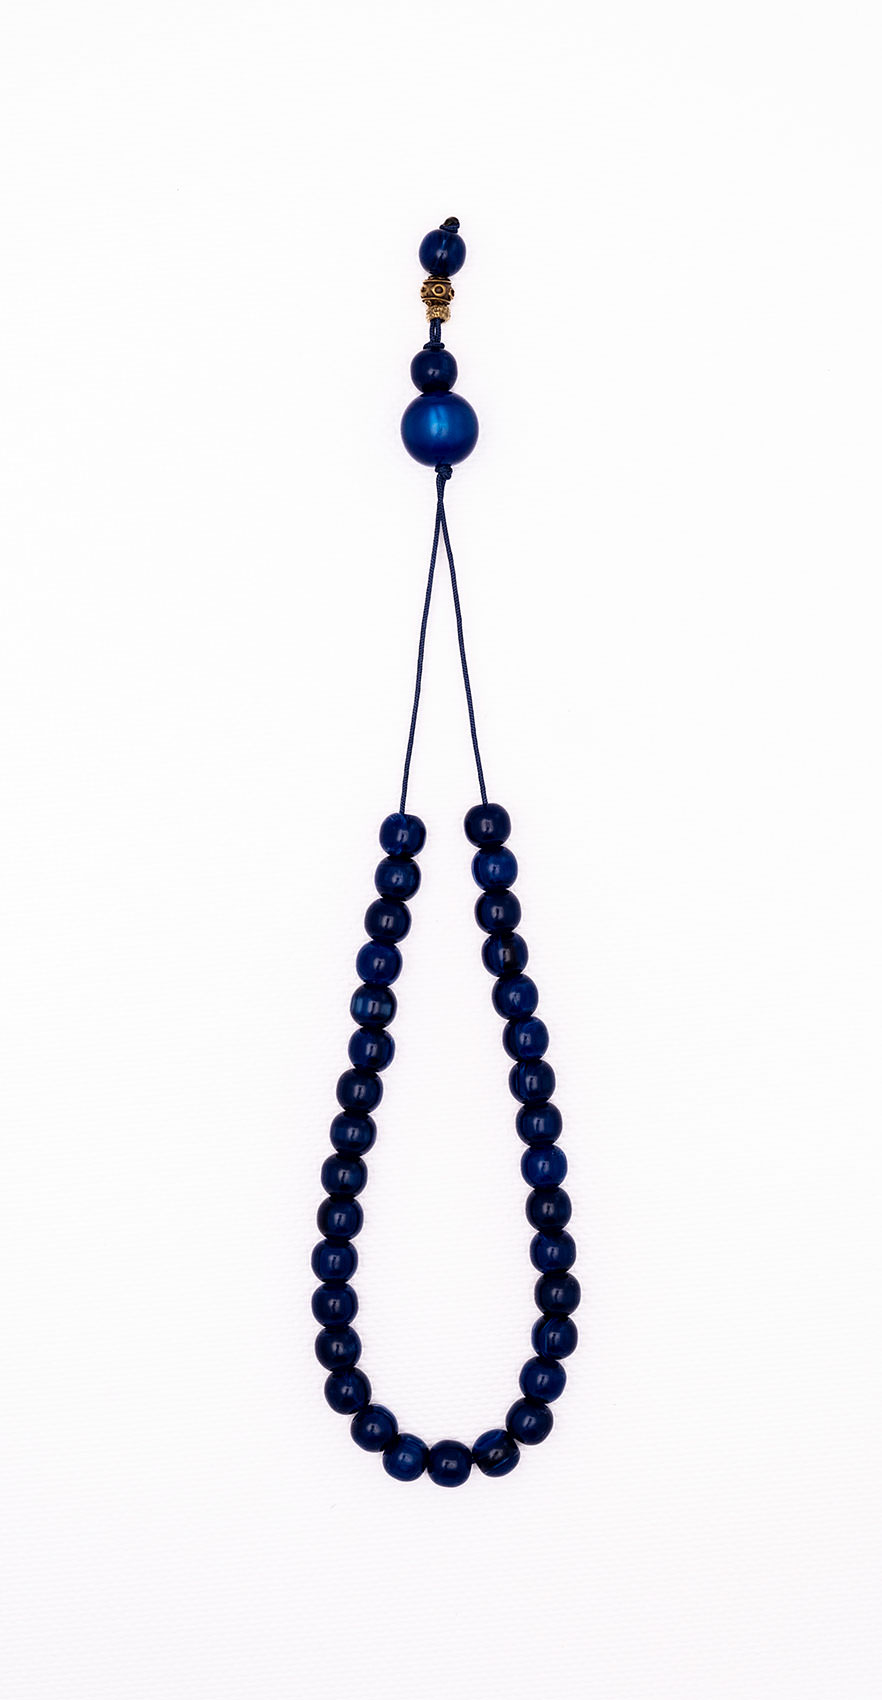 Artificial resin  (blue with water-like shades) 33 beads